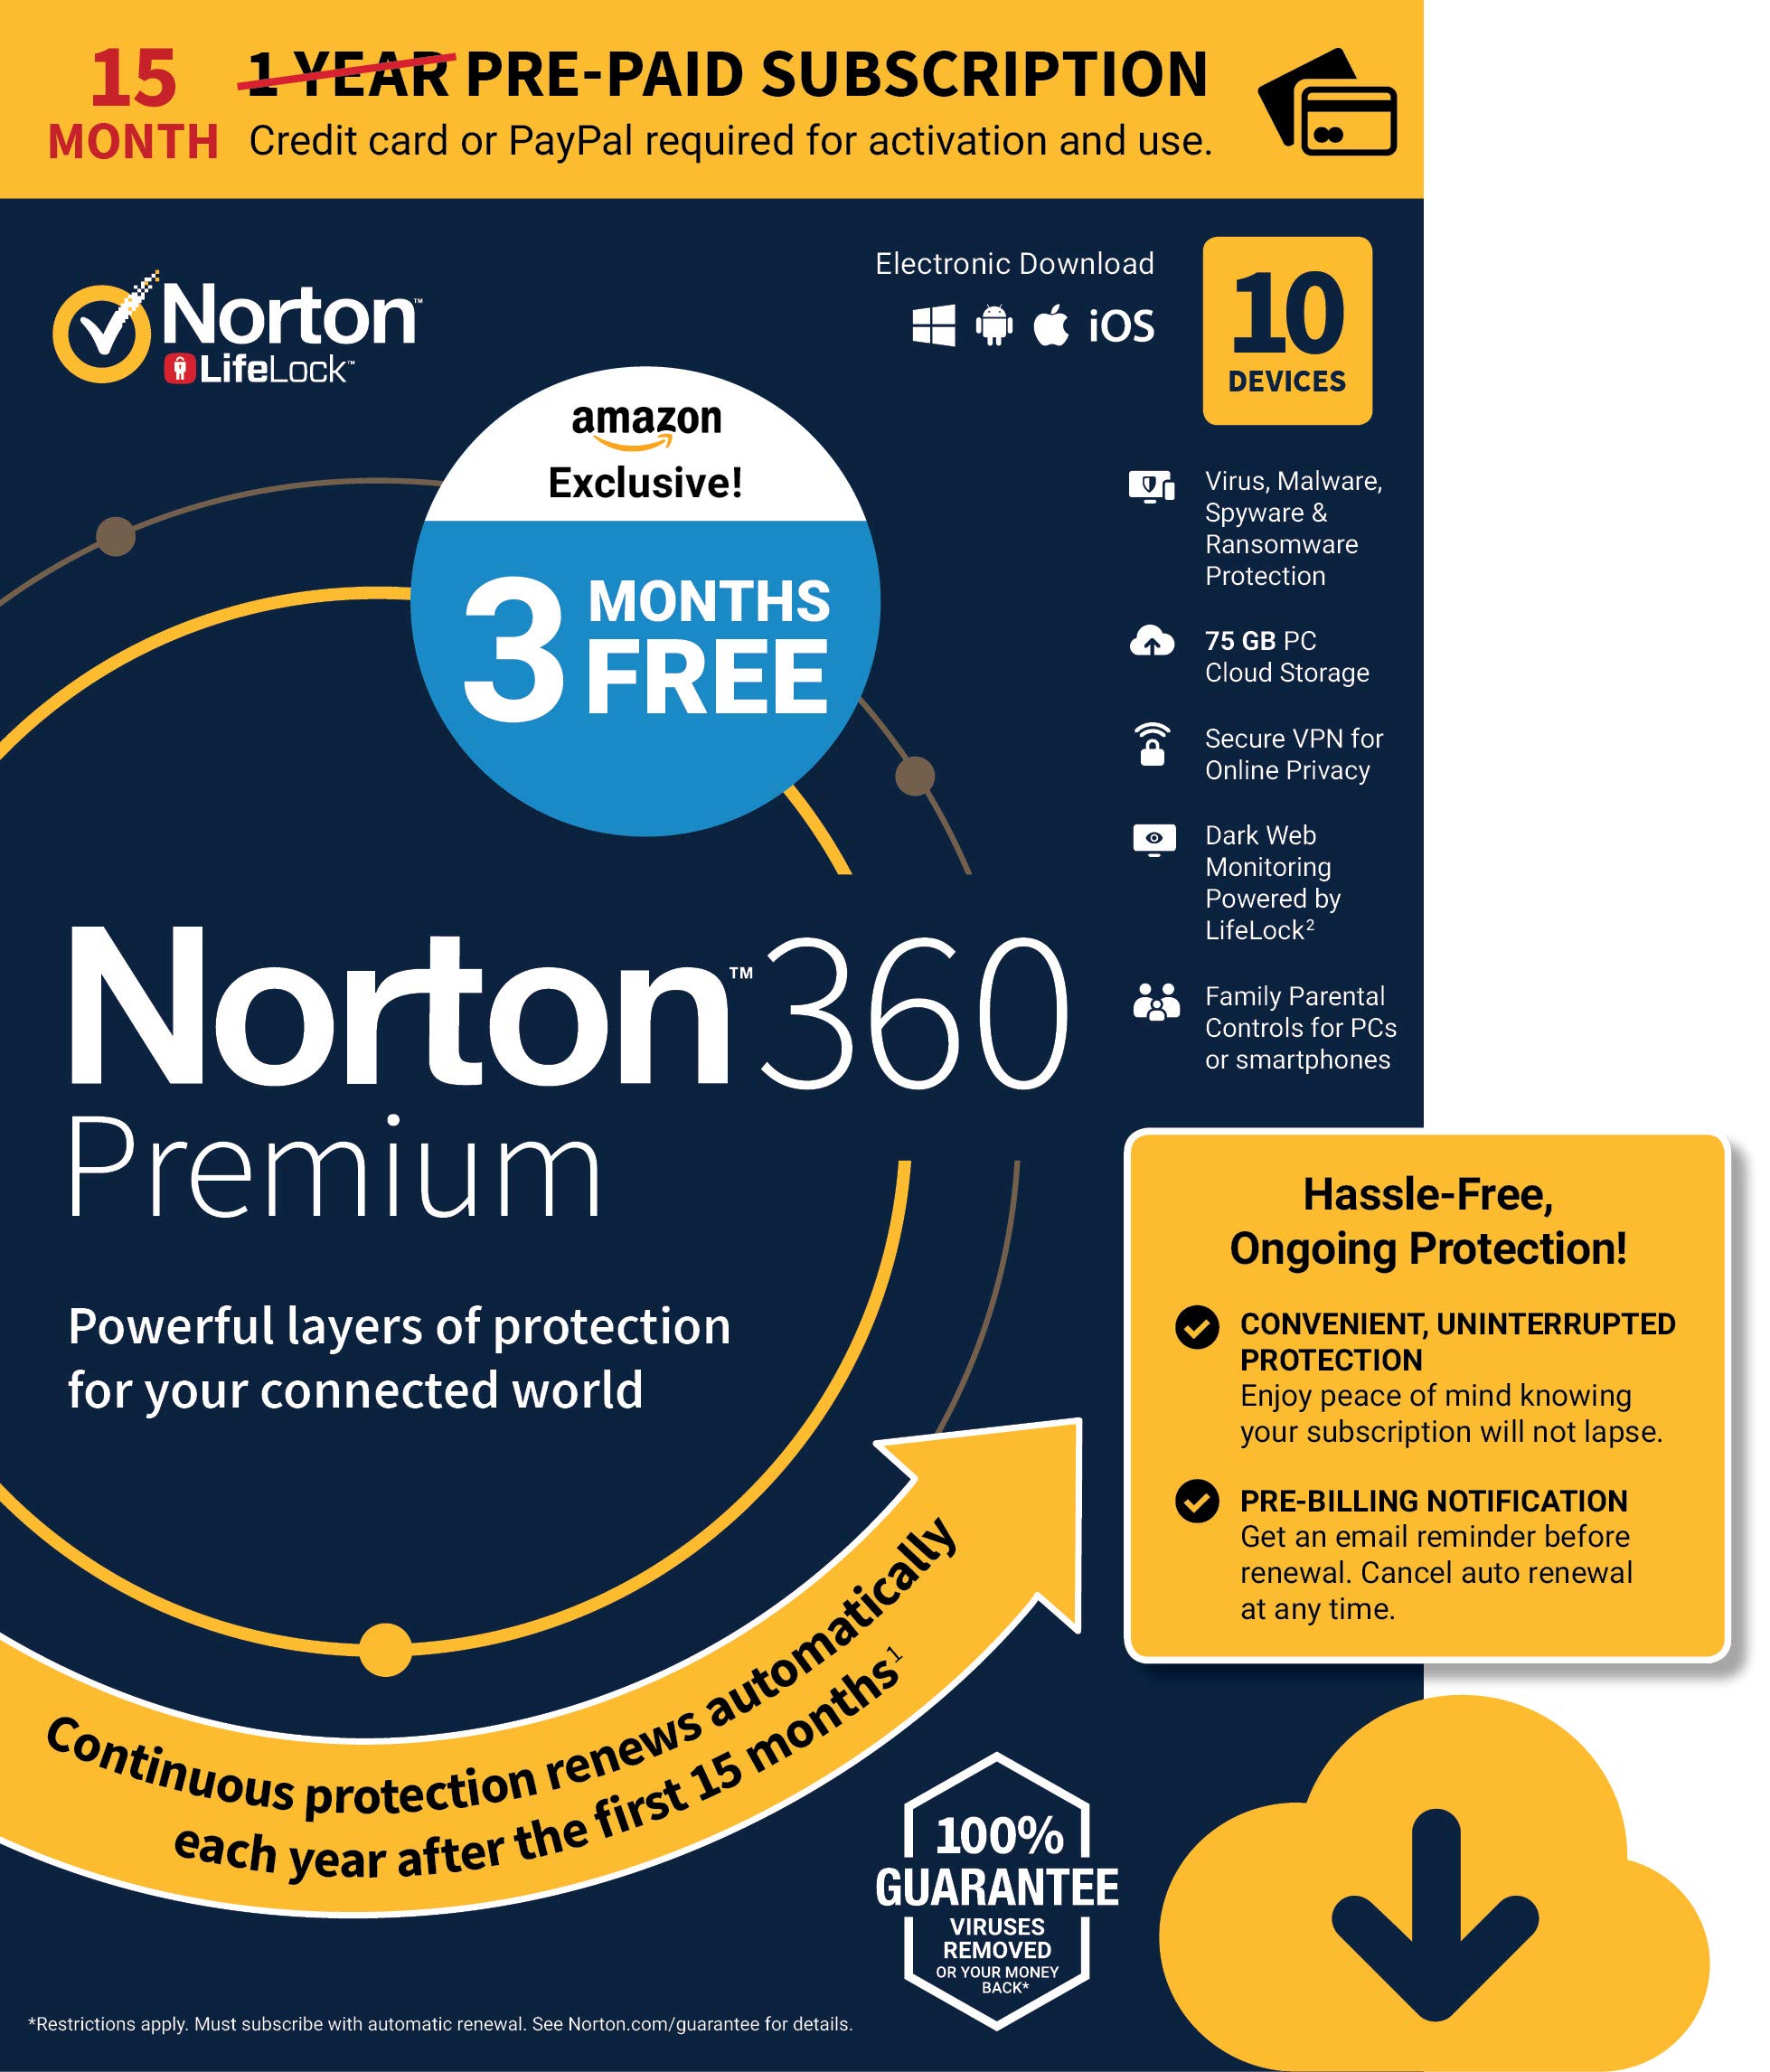 Book Cover EXCLUSIVE Norton 360 Premium – Antivirus software for 10 Devices with Auto Renewal - 15 Month Subscription - 3 Months FREE - Includes VPN, PC Cloud Backup & Dark Web Monitoring powered by LifeLock - 2020 Ready [Download]